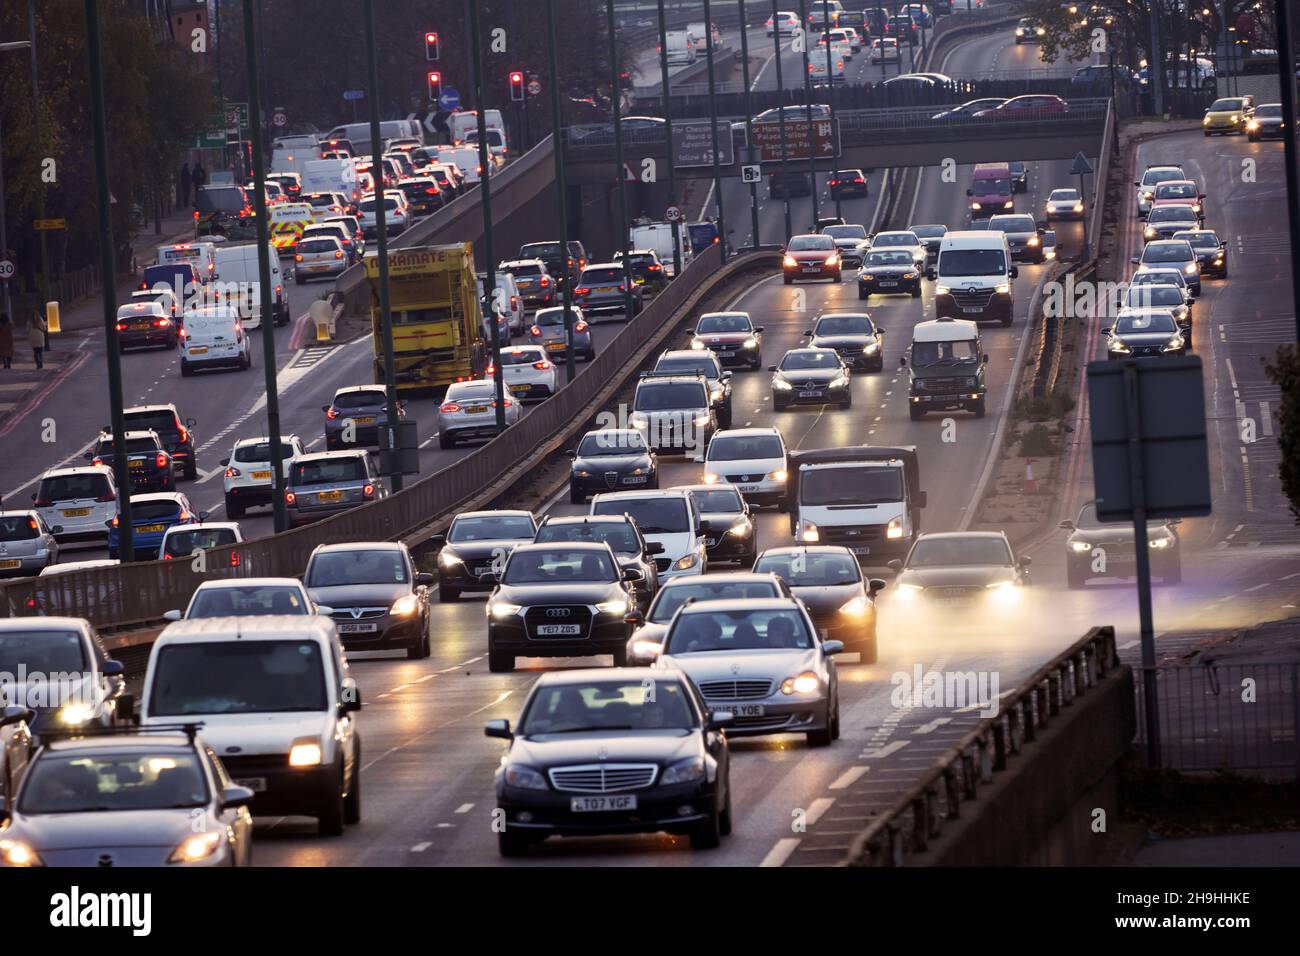 Heavy early evening commuter traffic on the A3 Trunk Road at dusk traveling to and from Central London. Stock Photo